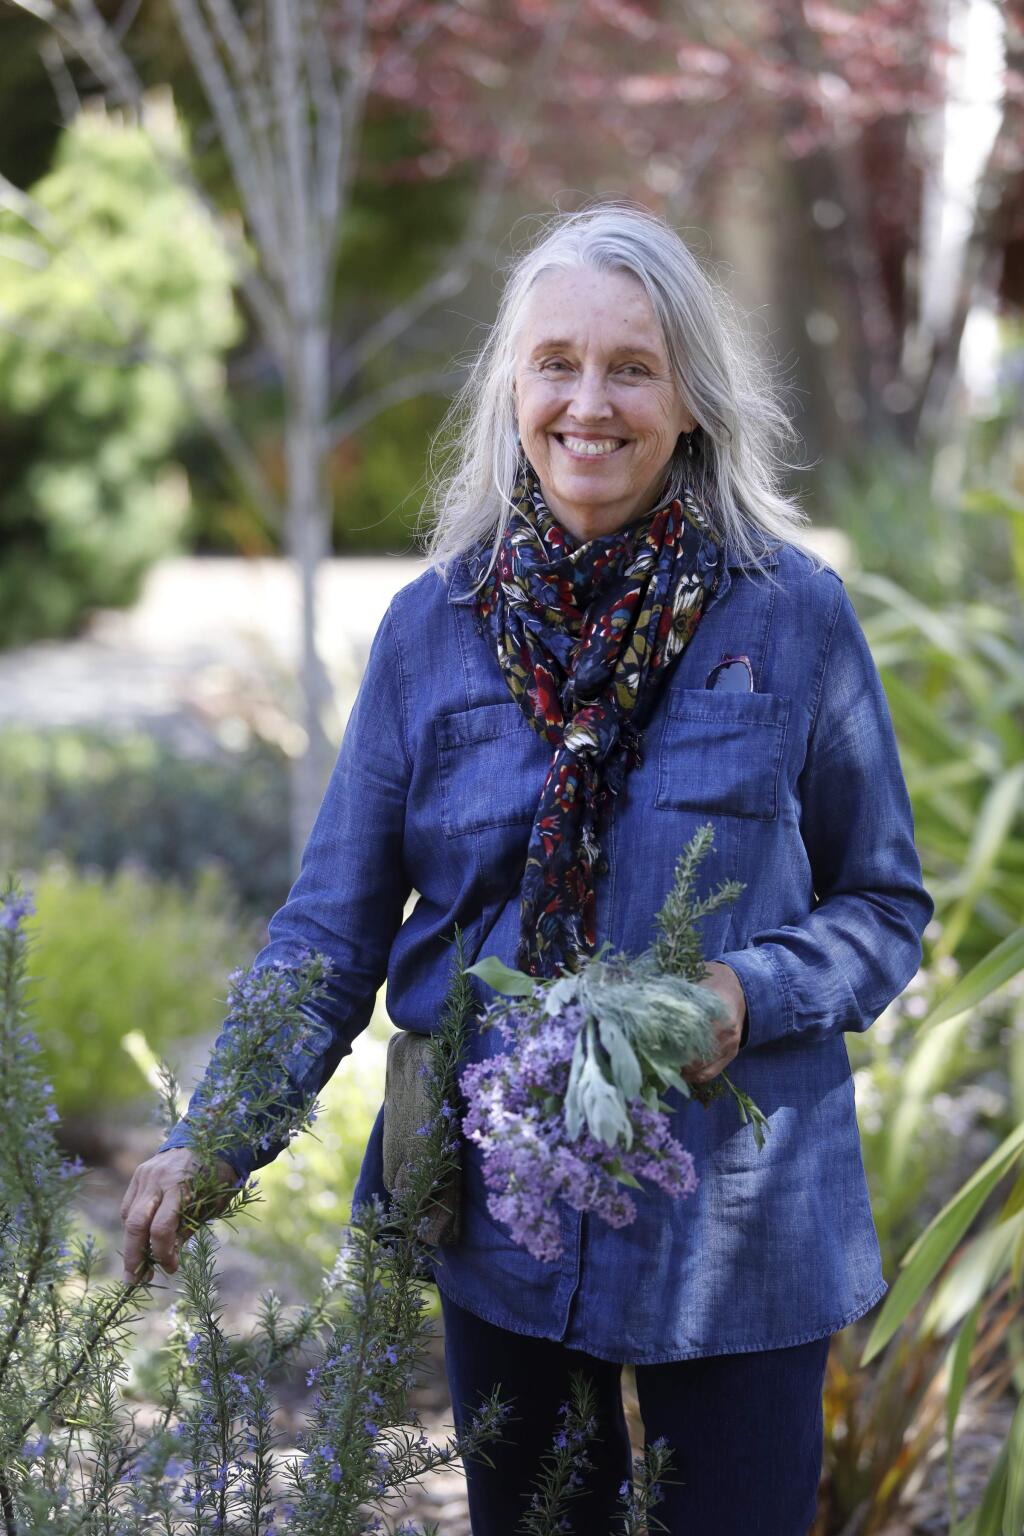 Ethnobotanist Kathleen Harrison, director of Botanical Dimensions, teaches a 'Global Ethnobotany with a Local Focus' class at the Occidental Center for the Arts on Sunday, April 8, 2018 in Occidental, California . (BETH SCHLANKER/The Press Democrat)